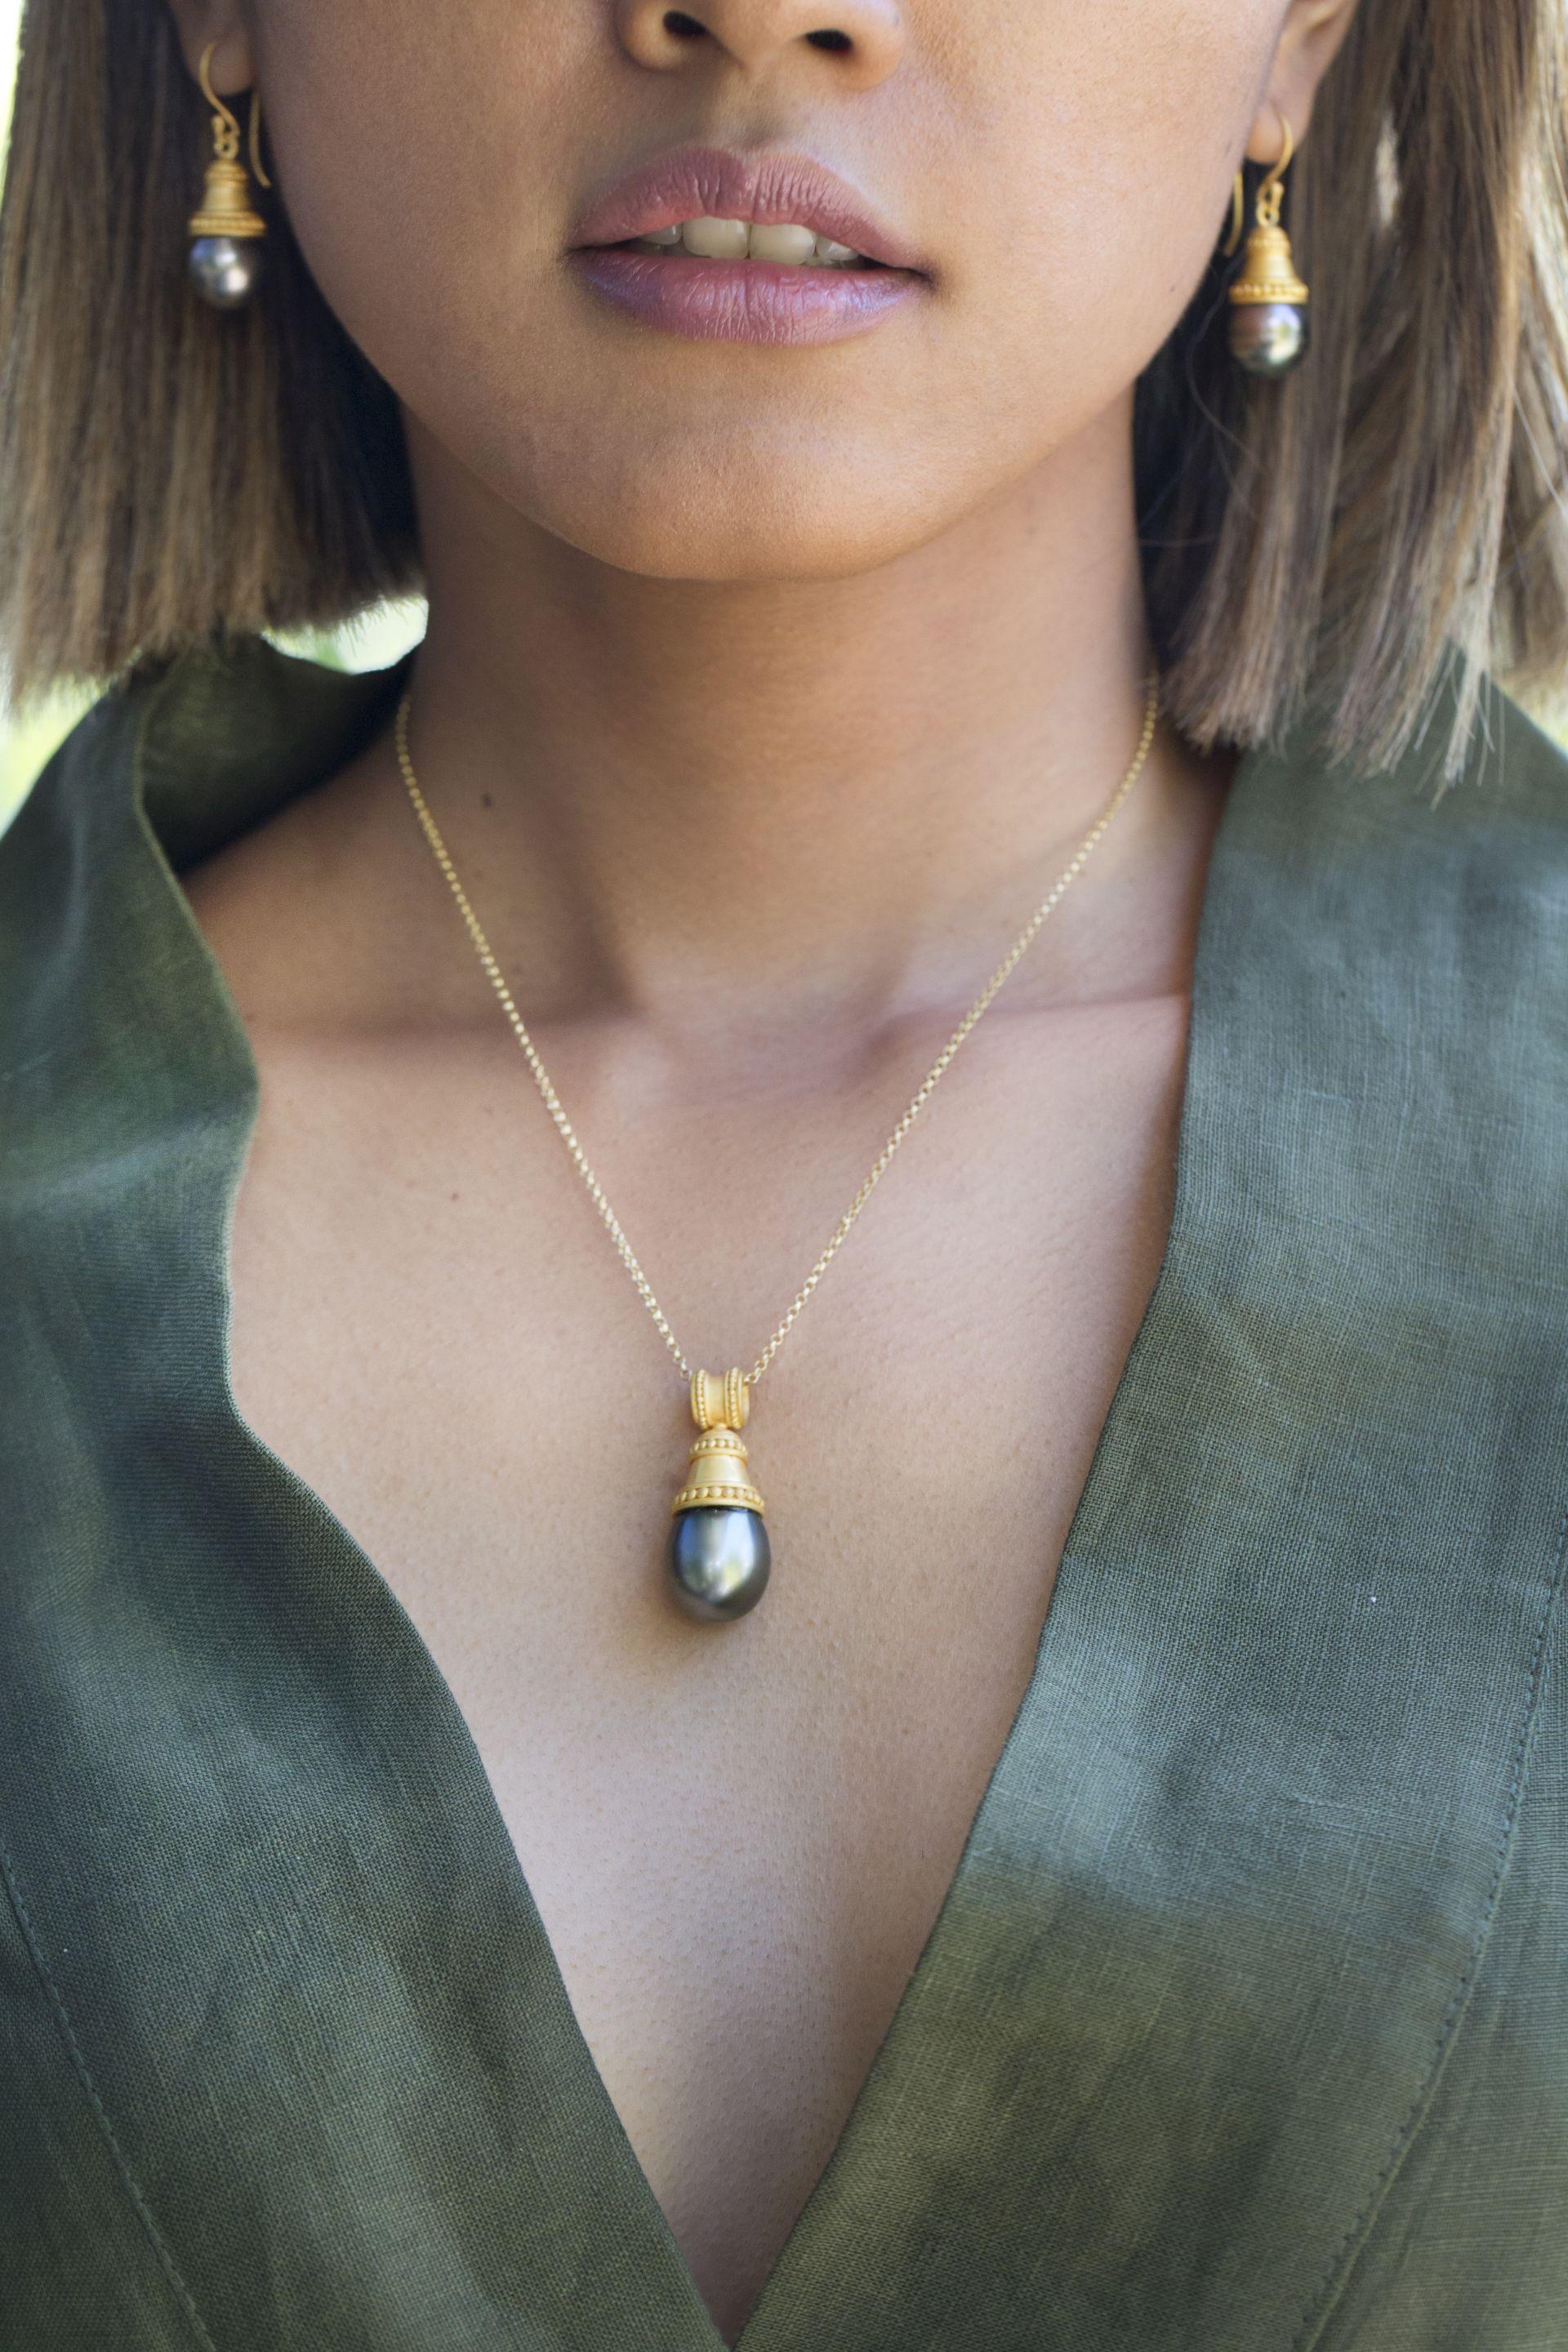 Handcrafted Etruscan style pendant . 18 karat gold with a Tahitian grey pearl. Magnificent one of by Maison de Bali private collection.

Handcrafted Etruscan style dangling earrings. 18 karat gold with a Tahitian grey pearl. The gold cap is